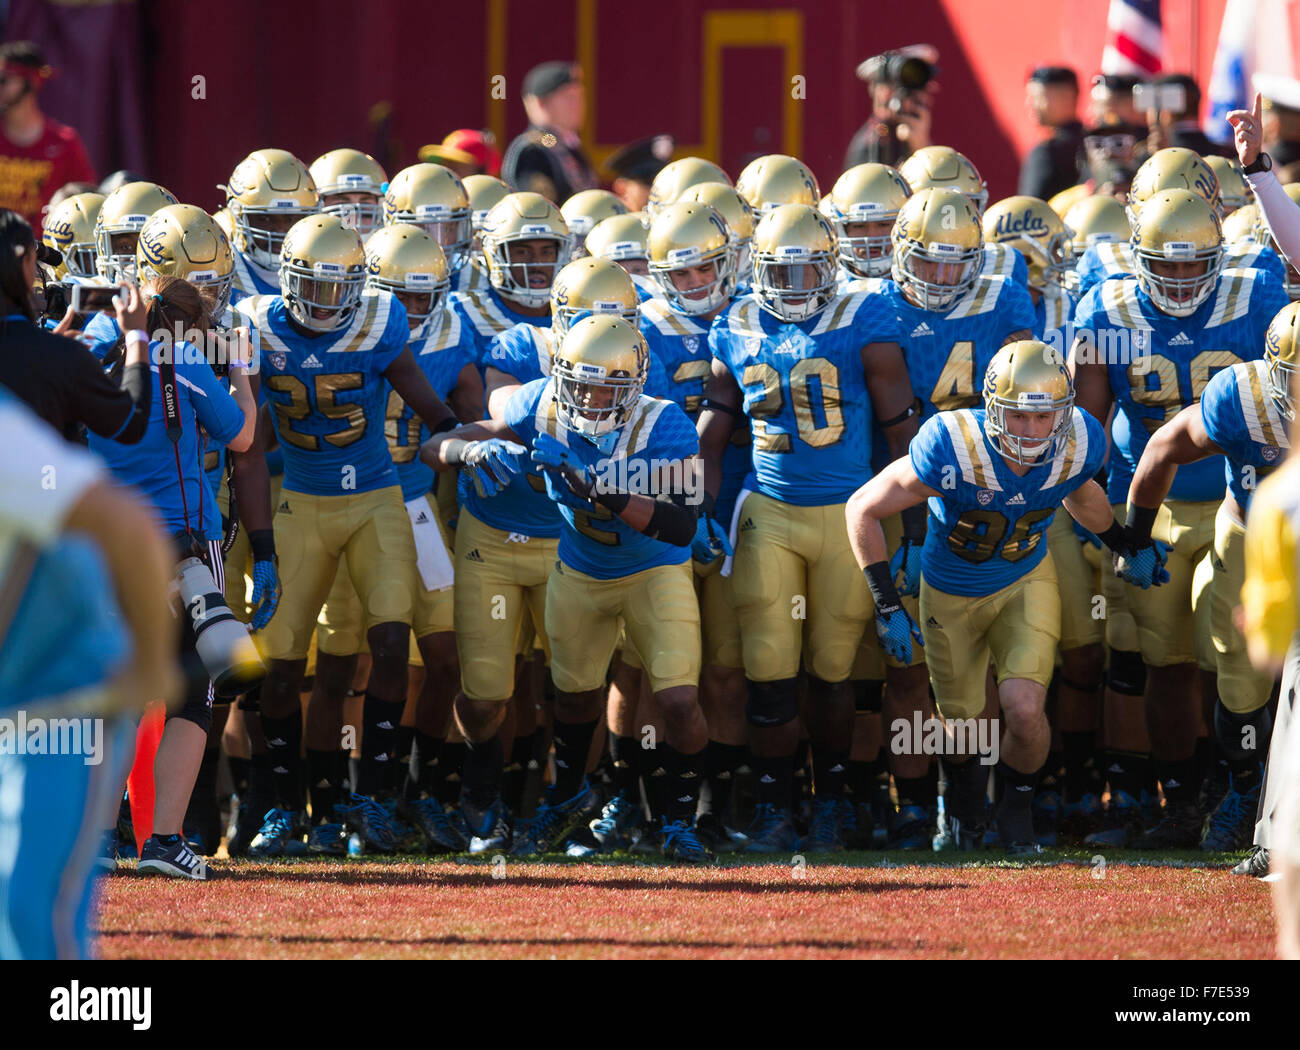 Los Angeles, CA, USA. 28th Nov, 2015. The UCLA Bruins run out onto the field before a game between the UCLA Bruins and the USC Trojans at the Los Angeles Memorial Coliseum in Los Angeles, California. USC defeated the UCLA Bruins 40-21.(Mandatory Credit: Juan Lainez/MarinMedia/Cal Sport Media) © csm/Alamy Live News Stock Photo